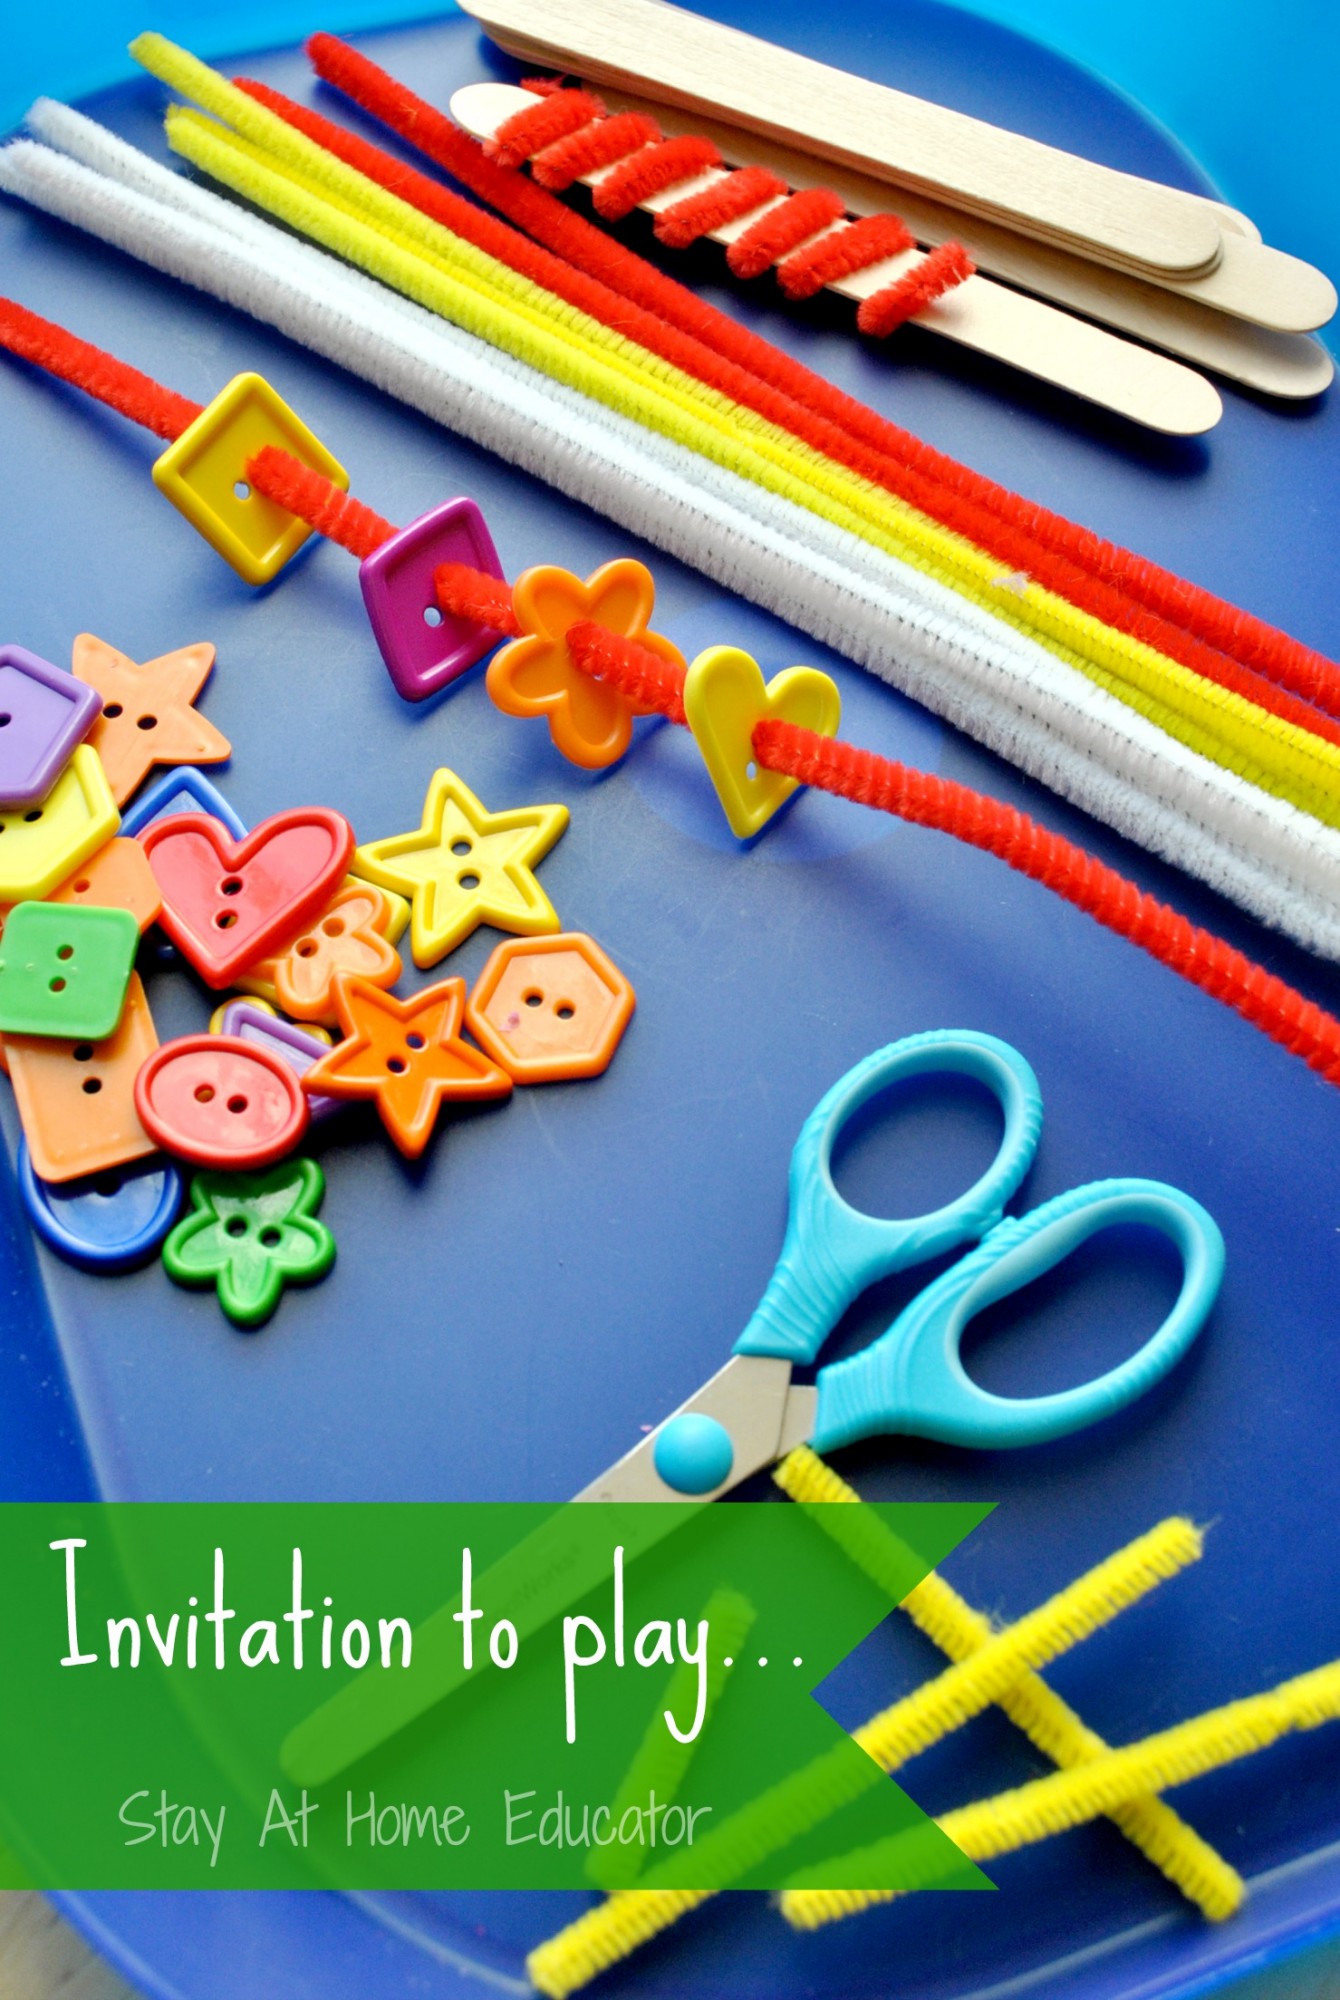 Invitation to play with craft sticks, pipe cleaner, and buttons - Stay At Home Educator